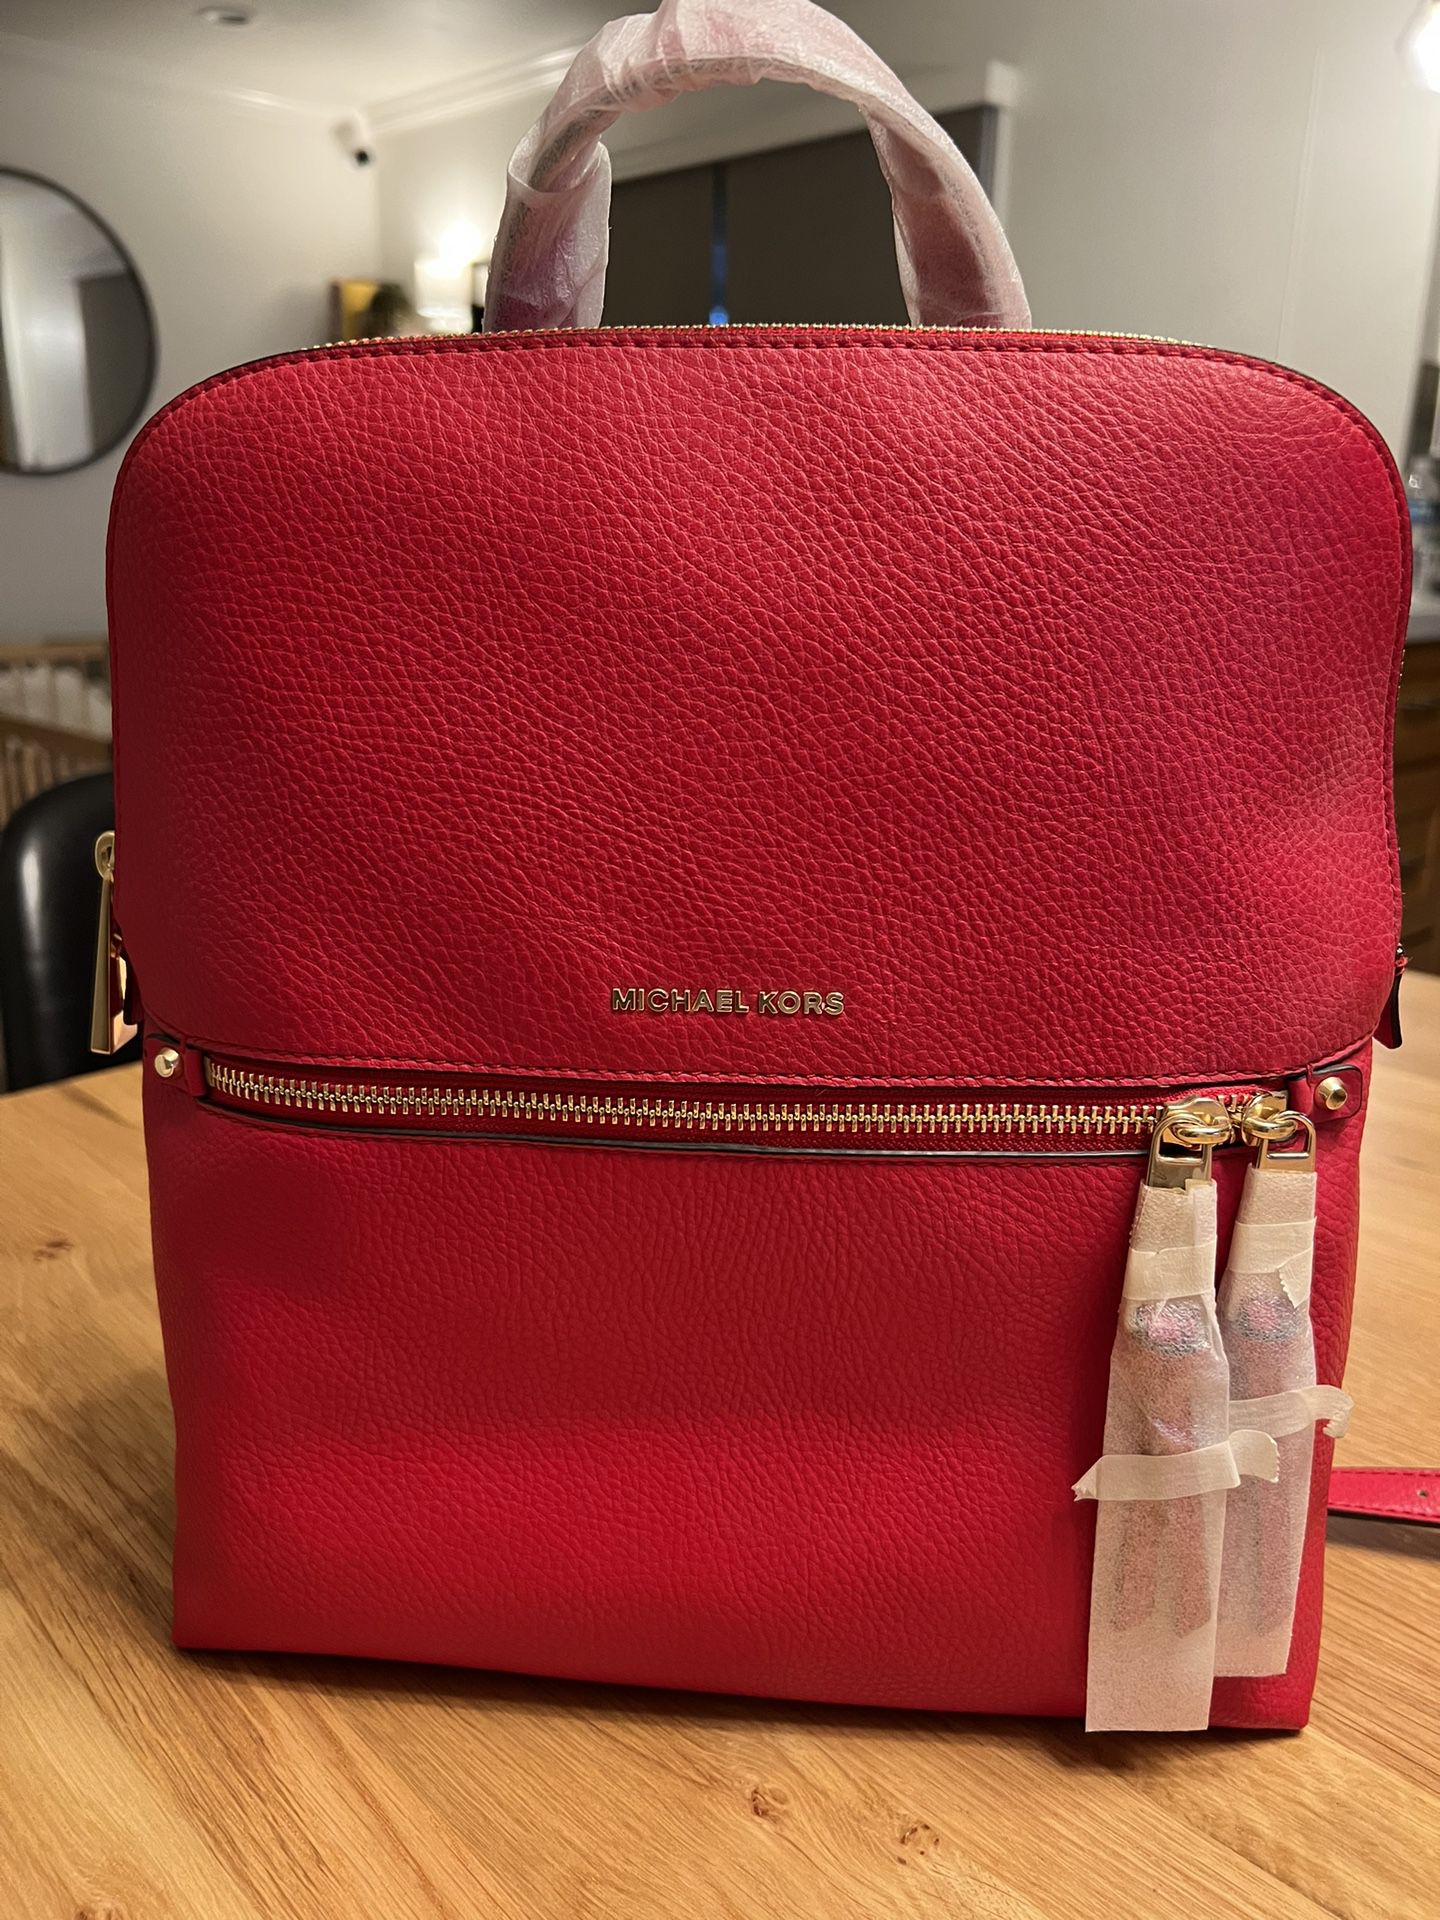 Red leather Michael Kors Backpack for Sale in Chino Hills, CA - OfferUp